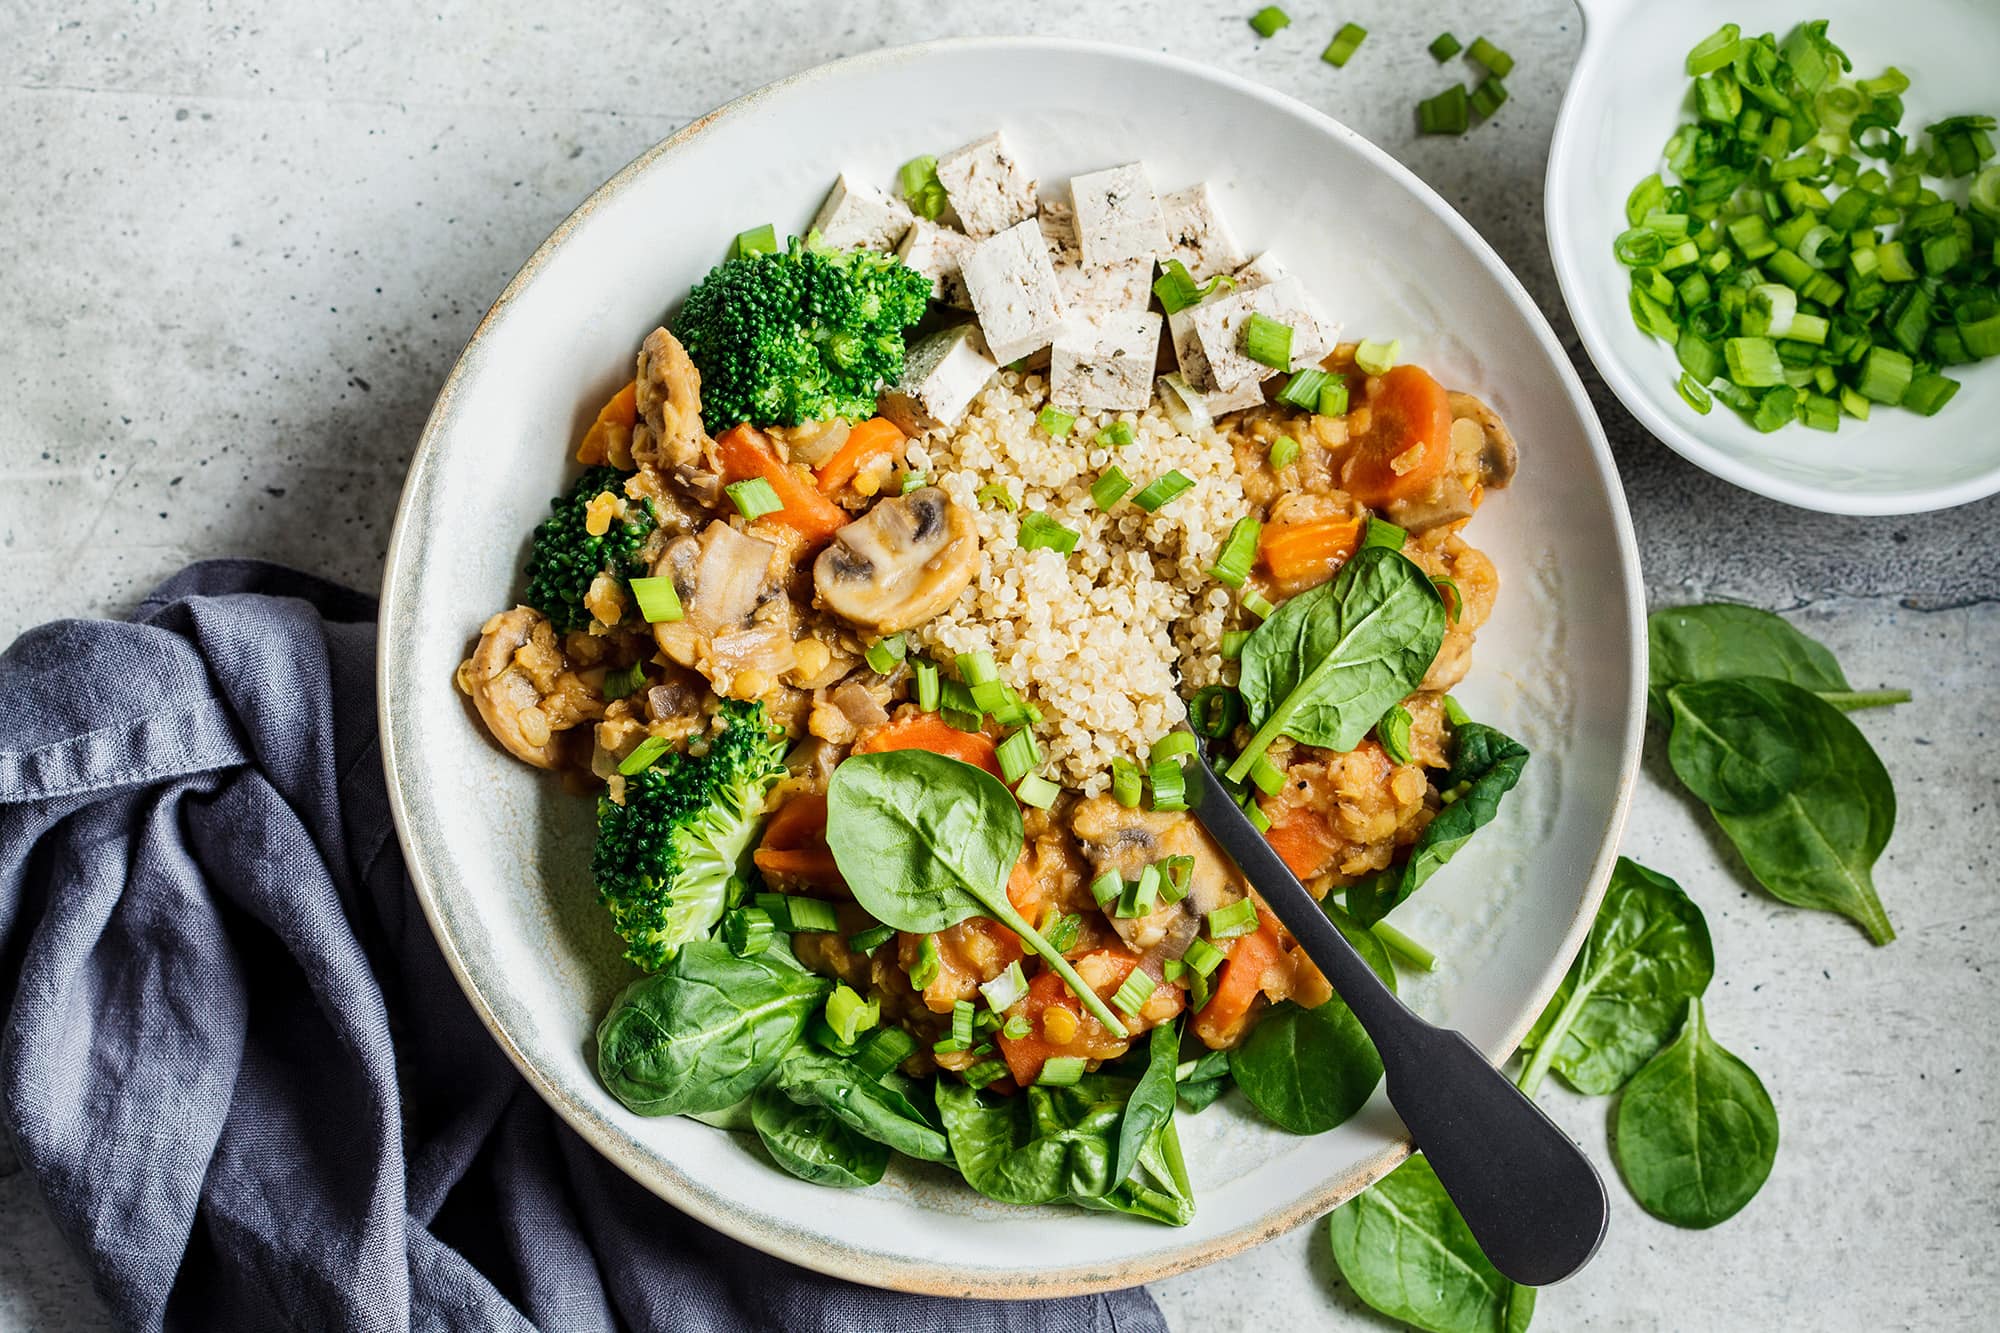 Vegan lentil stew with mushrooms, quinoa, spinach, and broccoli in bowl.